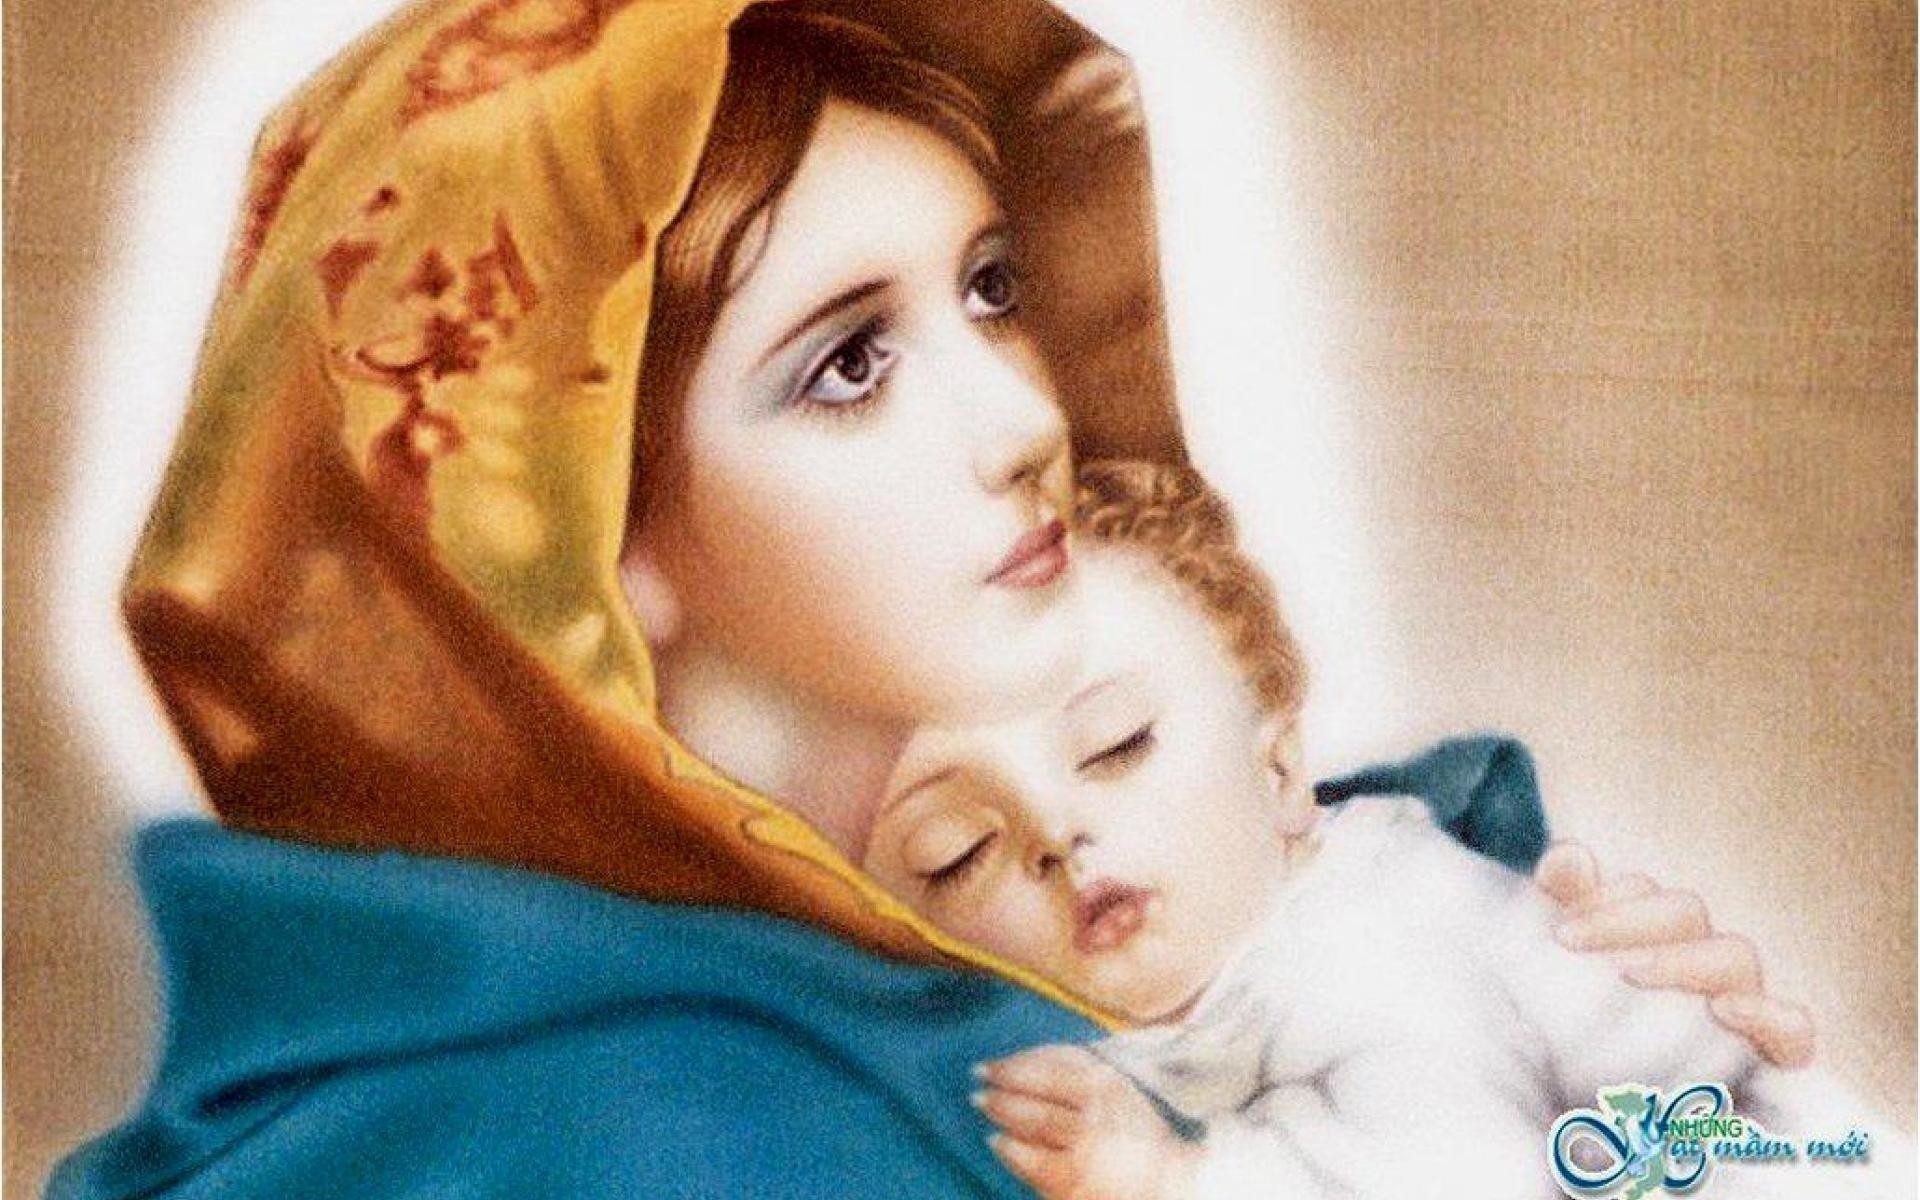 1920x1200 Title : mother mary with baby jesus wallpaper (34+ images) Dimension : 1920  x 1200. File Type : JPG/JPEG